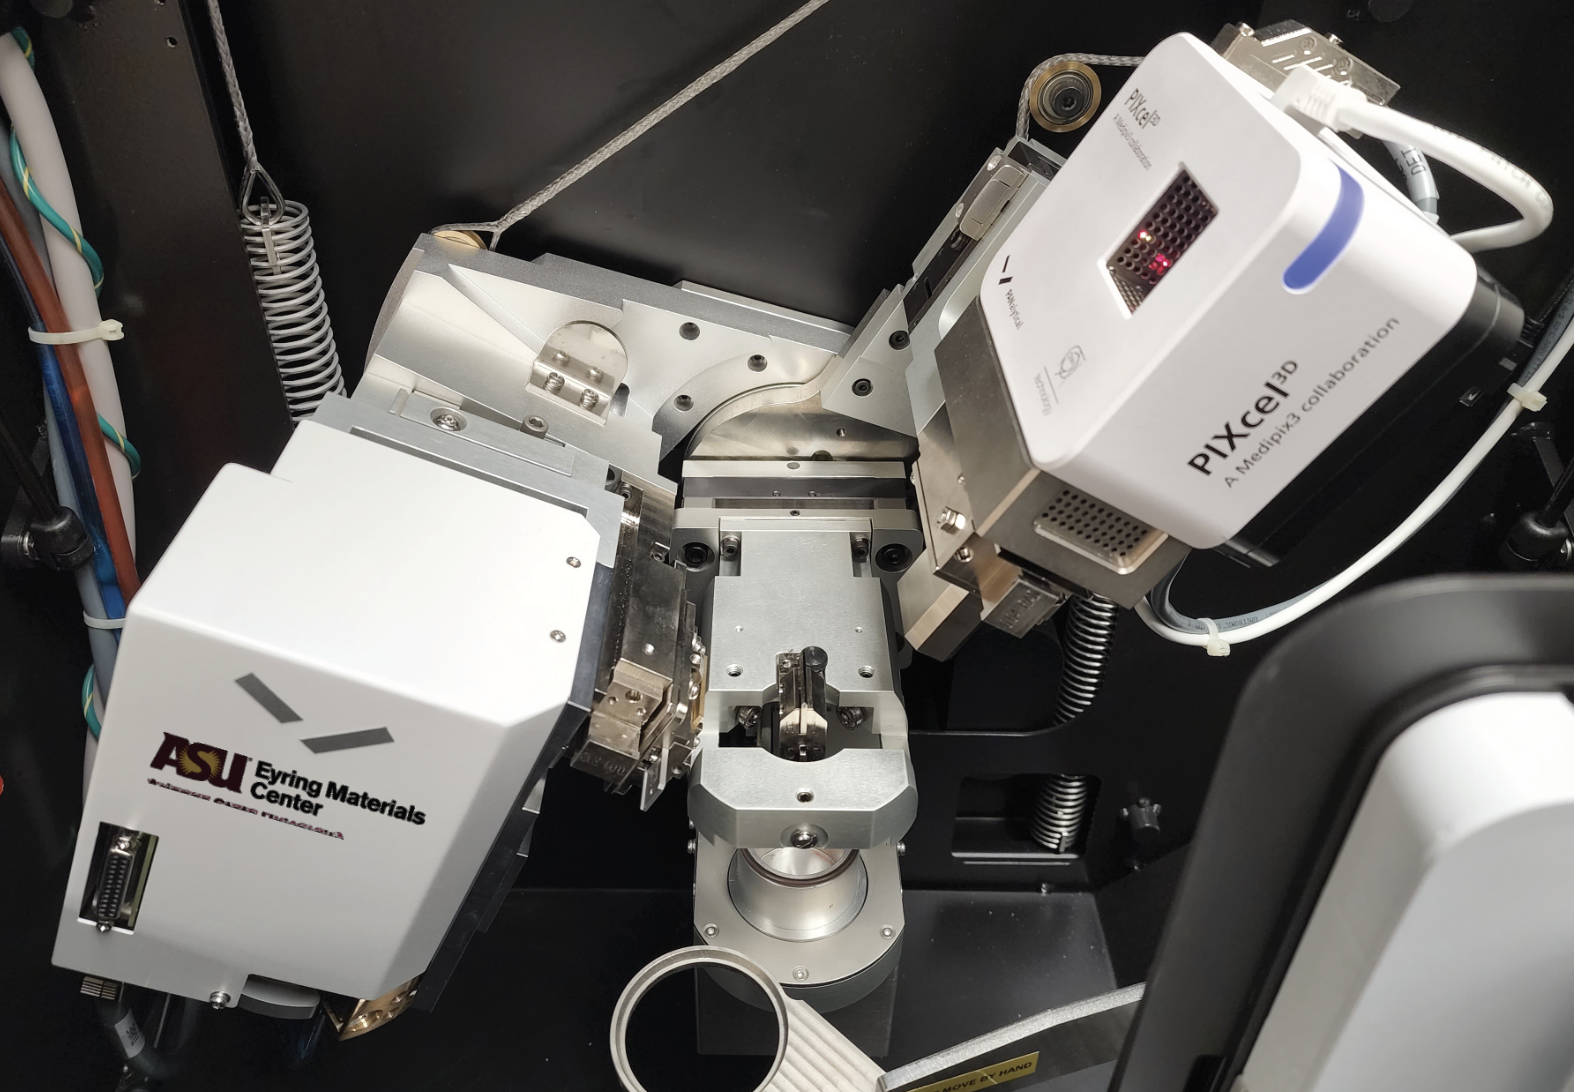 View inside our Aeris Diffractometer